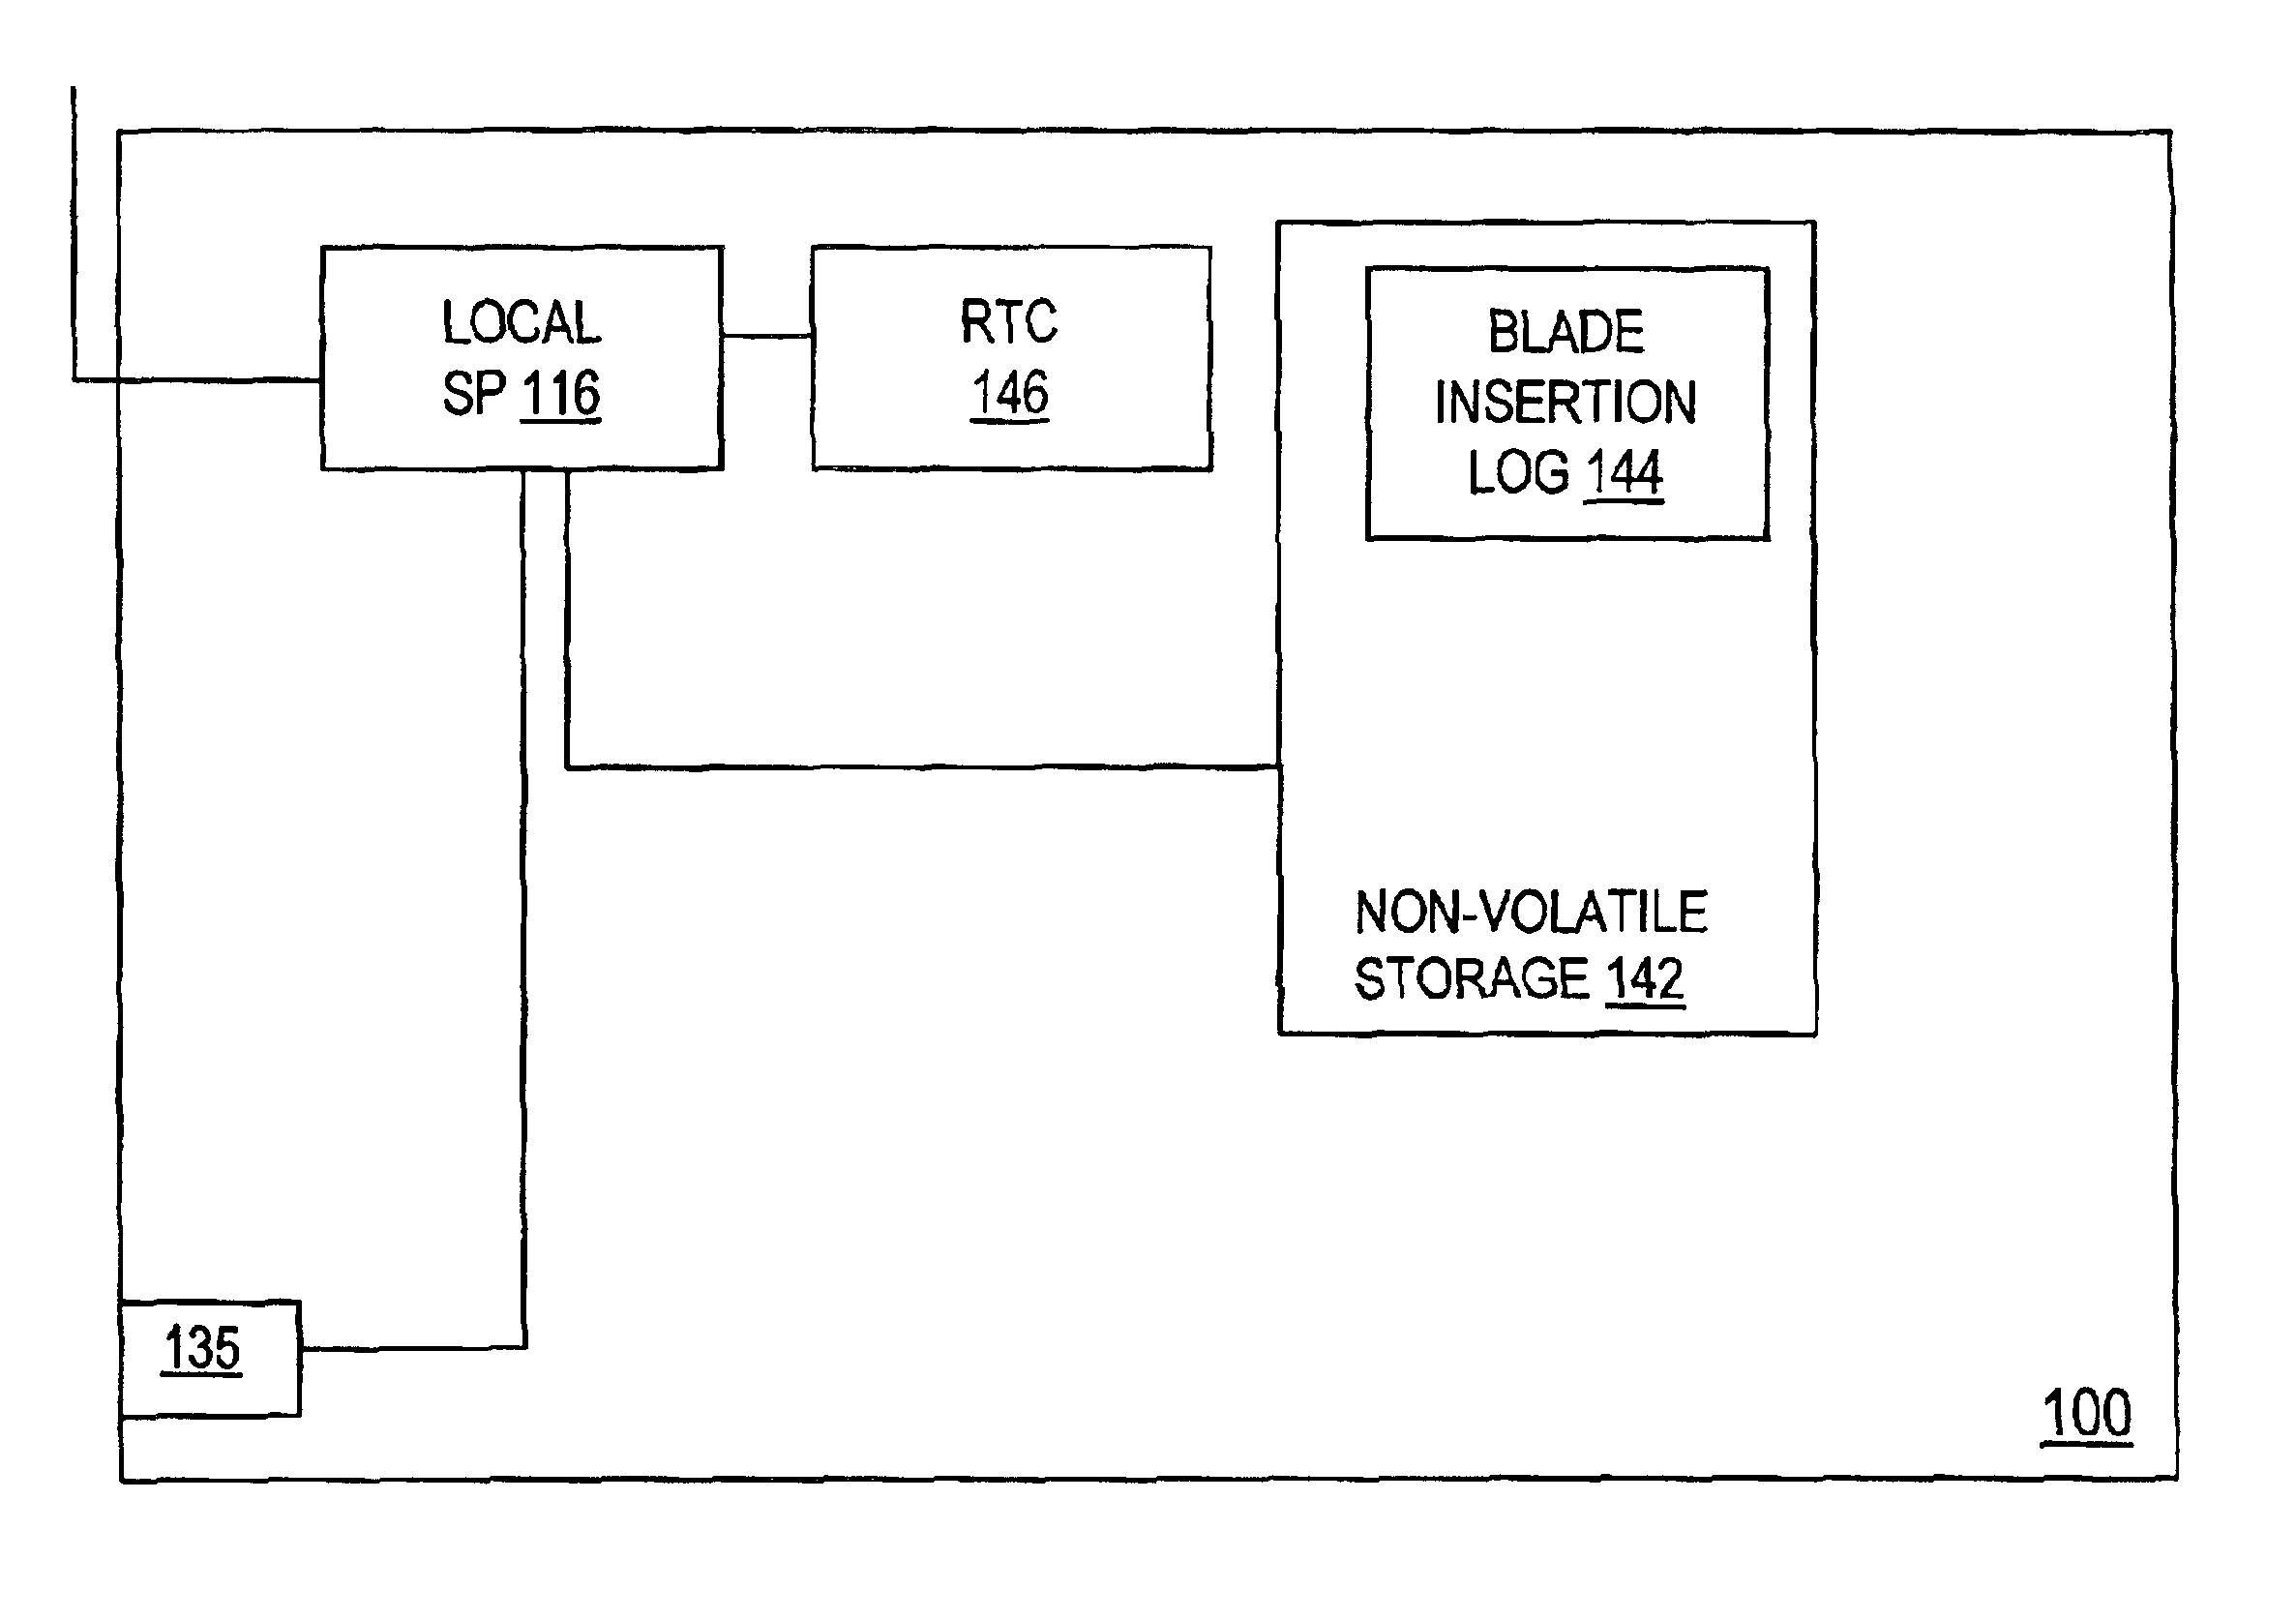 Logging insertion/removal of server blades in a data processing system